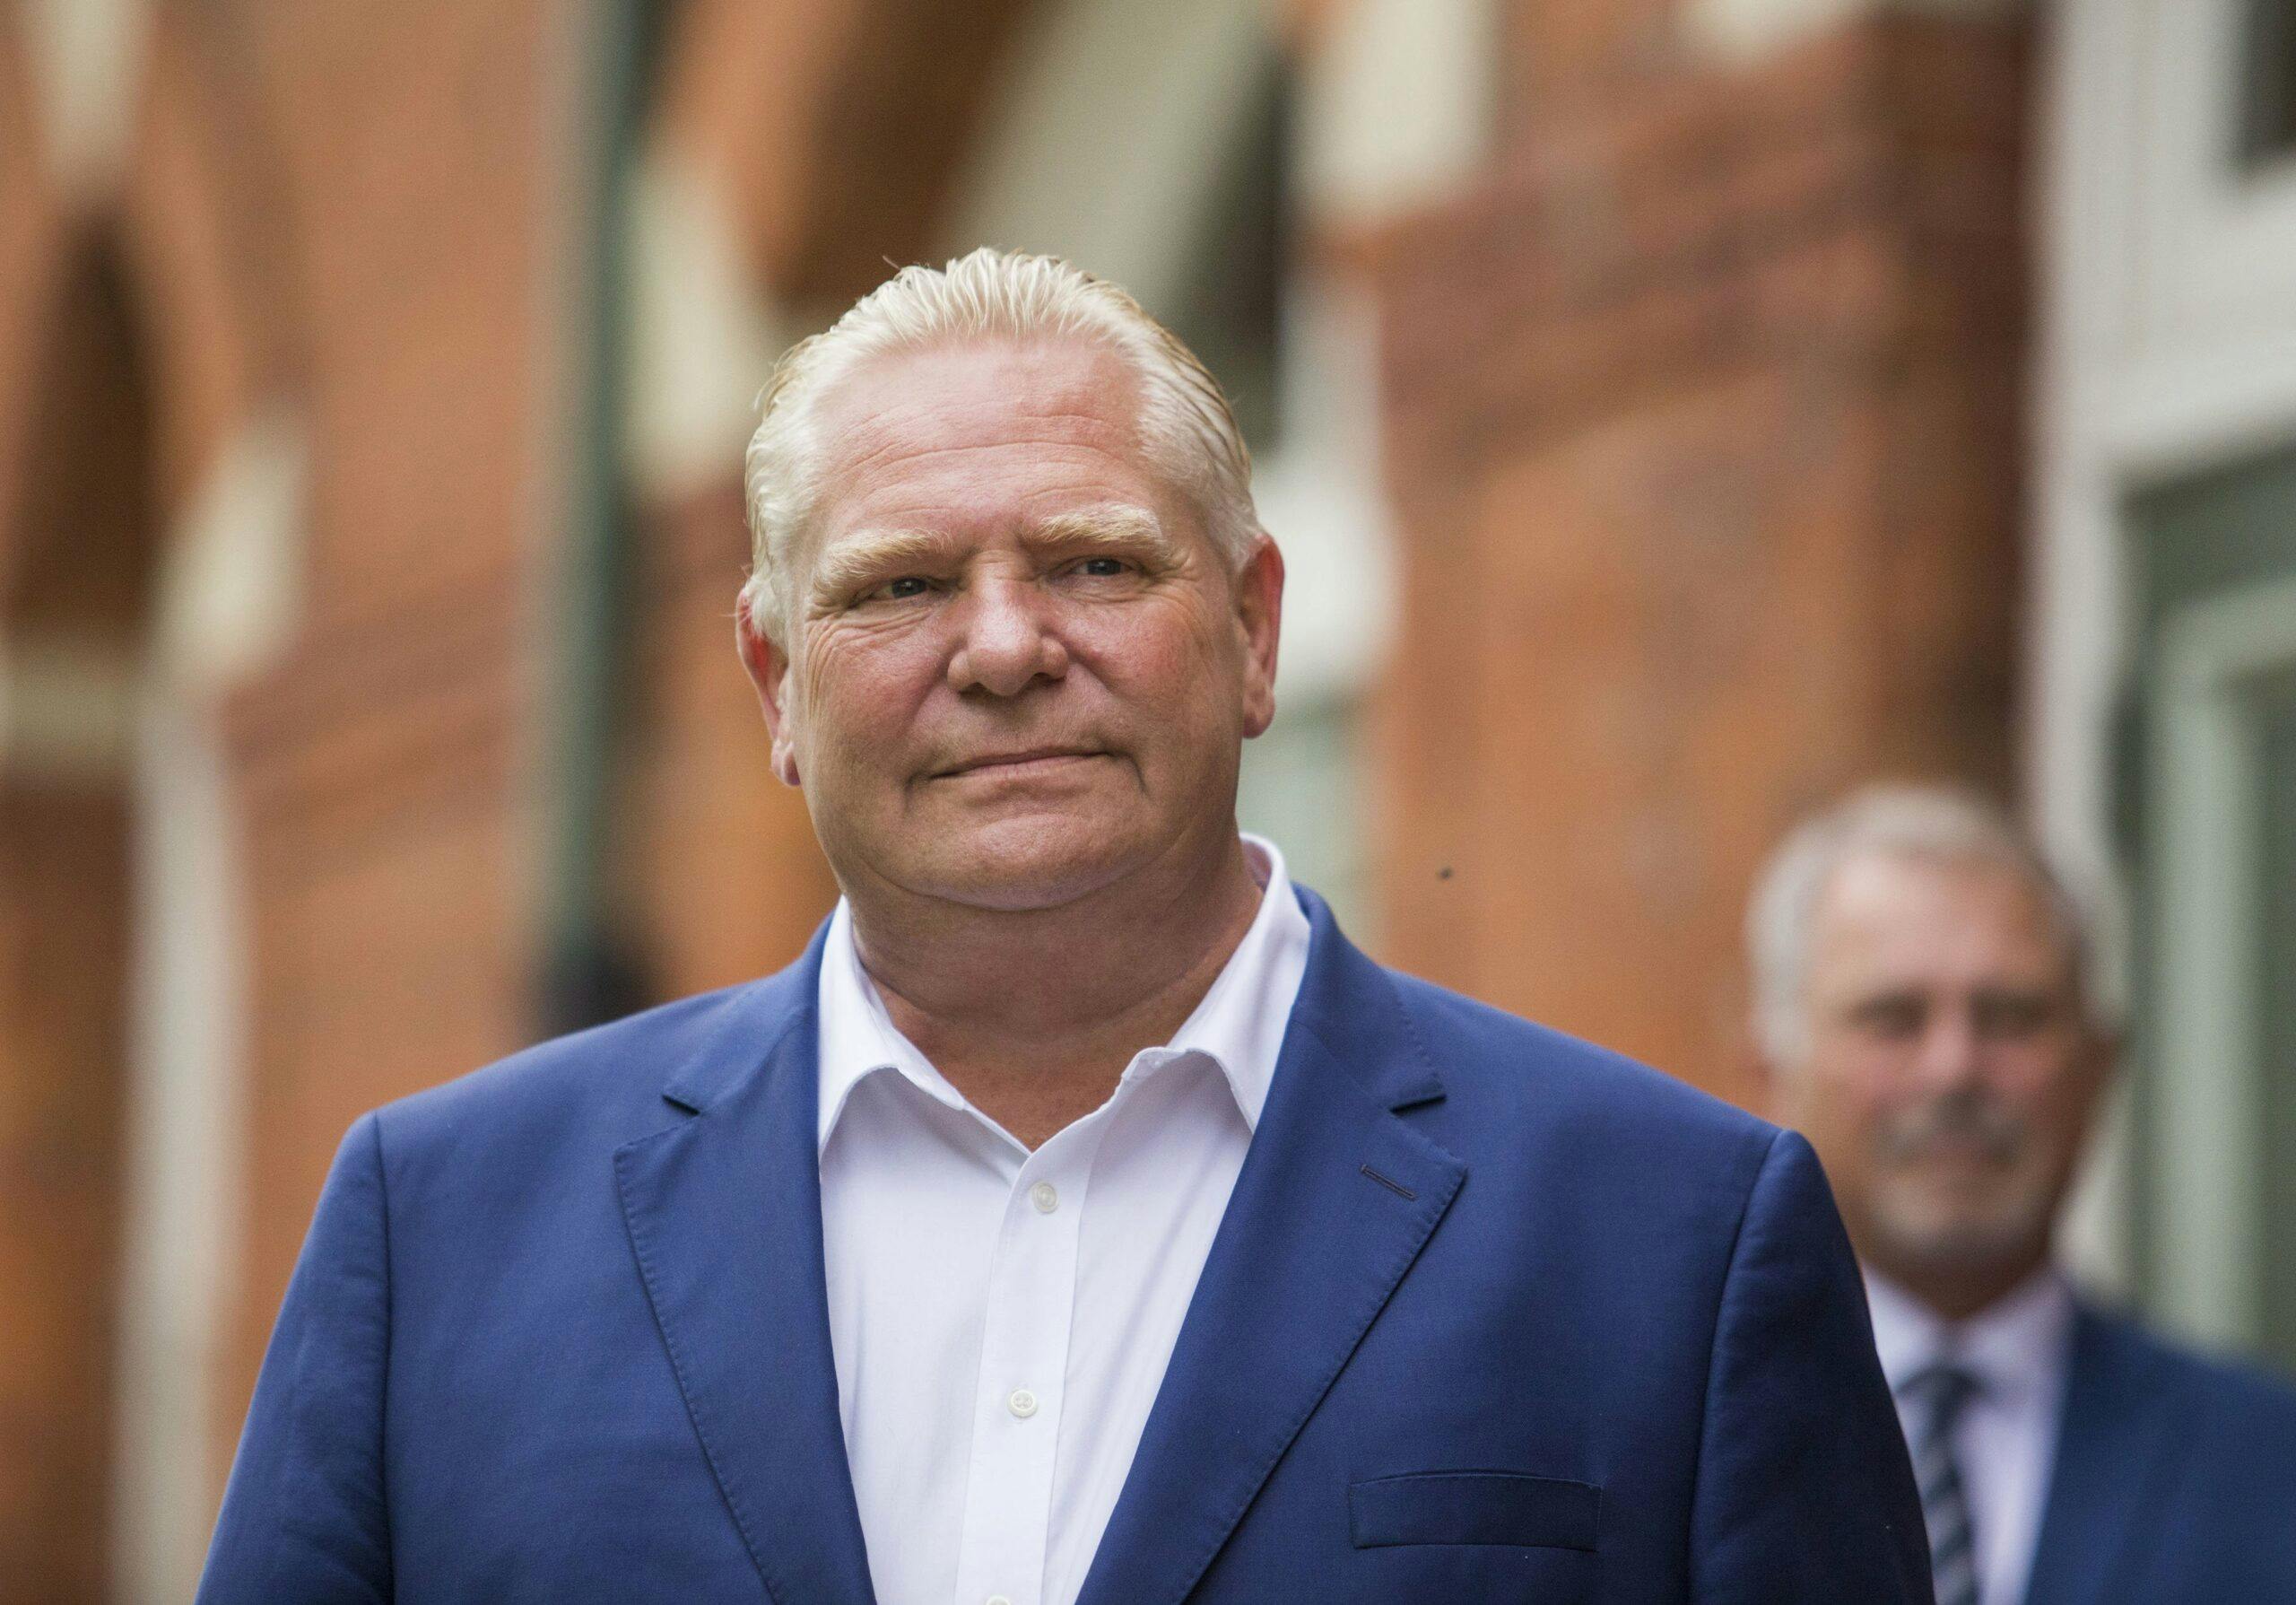 ‘Don’t force my hand,’ Premier Ford warns education unions tempted to strike